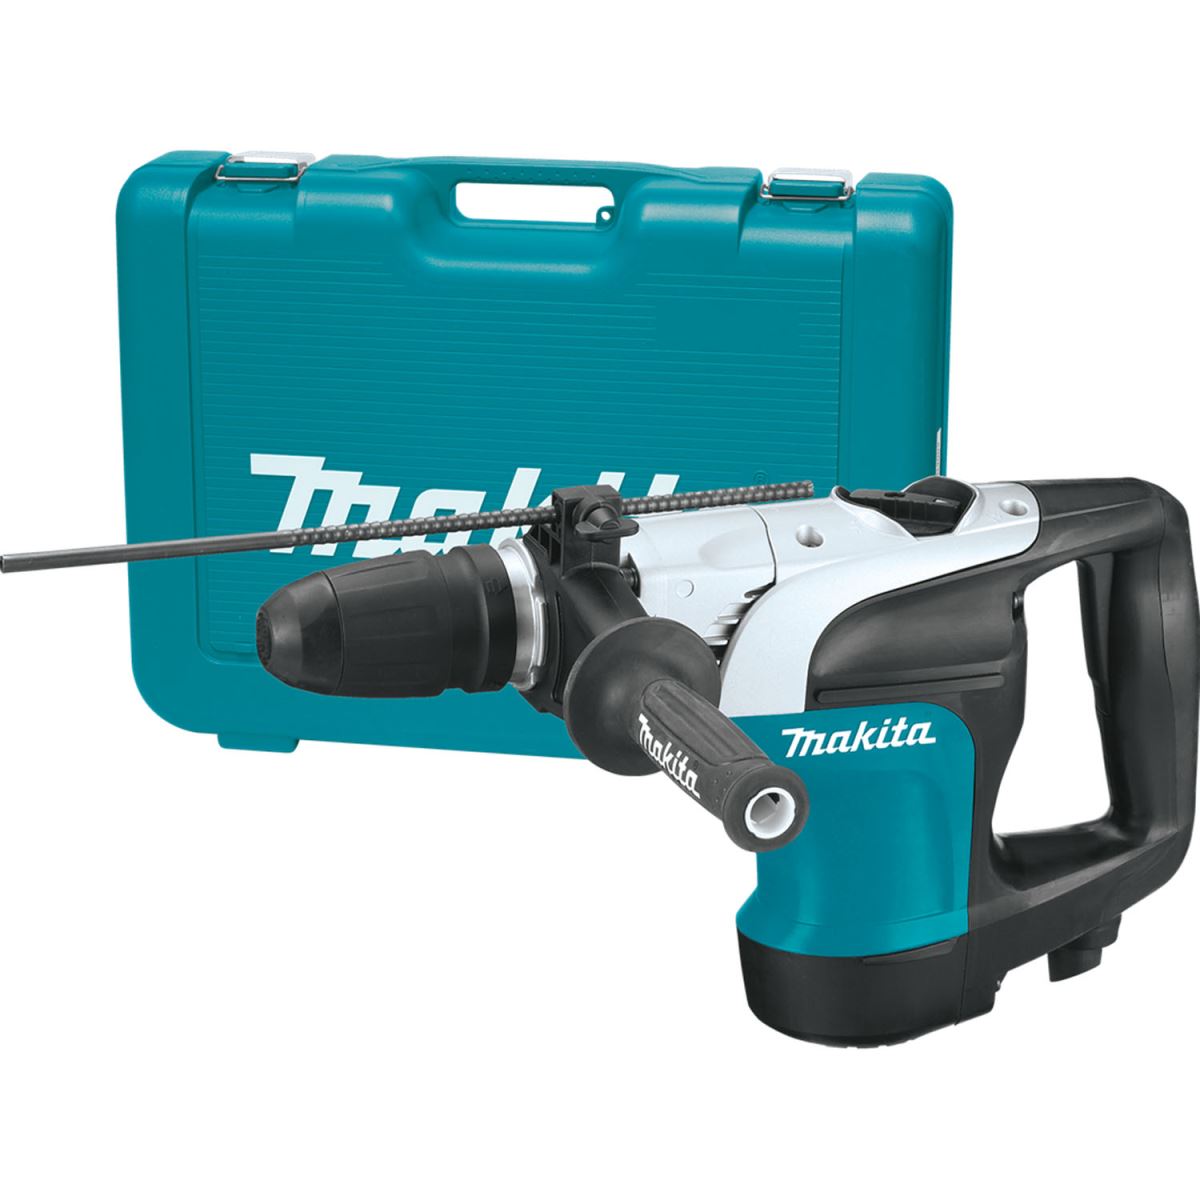 1-9/16 IN. SDS MAX ROTARY HAMMER 10 AMP